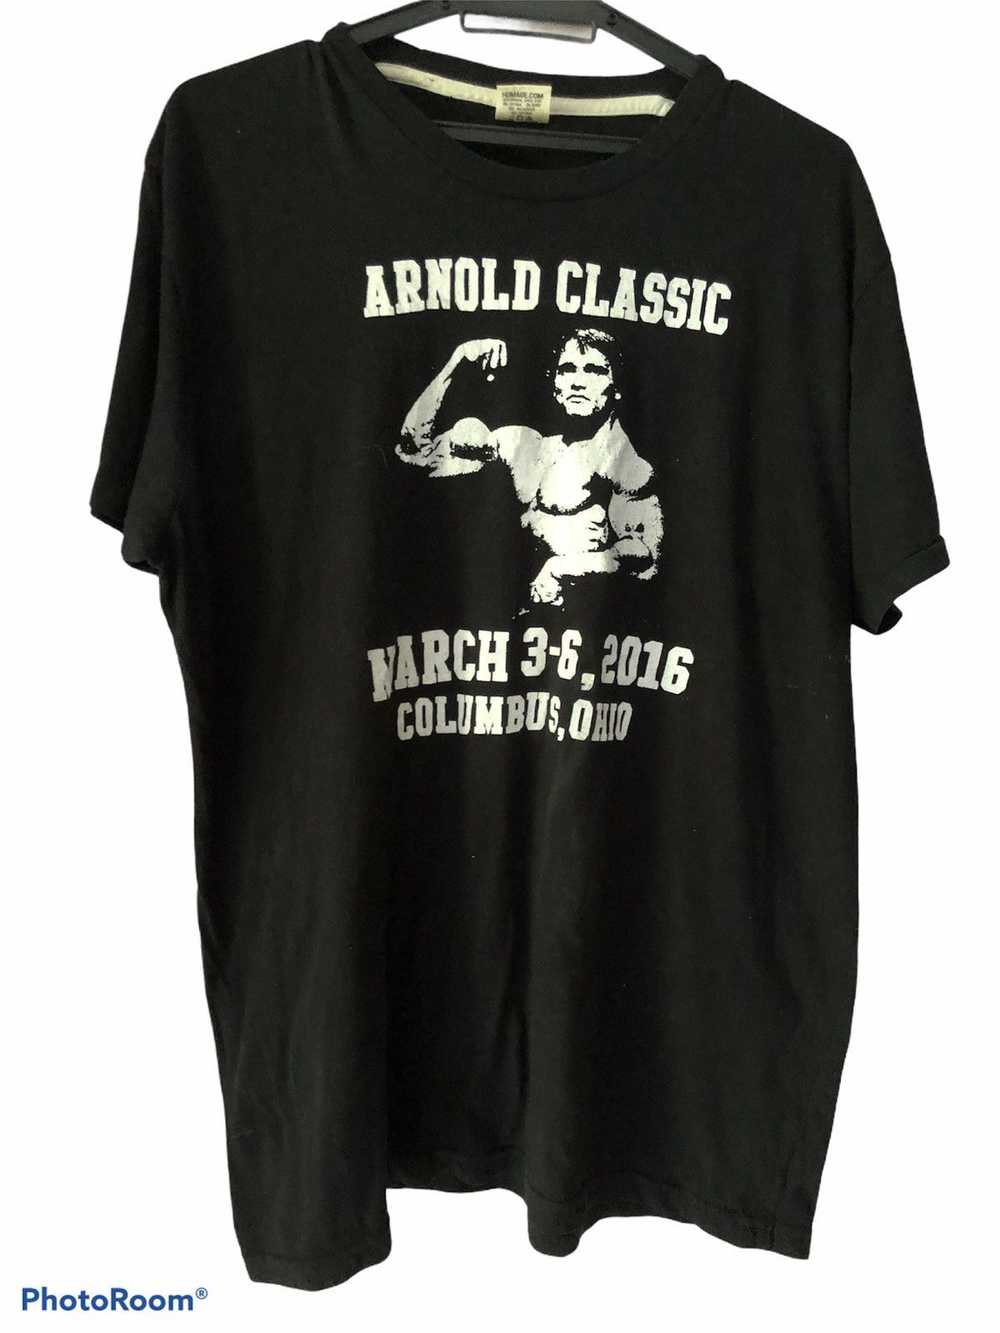 Made In Usa × Other Arnold classic March 3-6,2016… - image 1